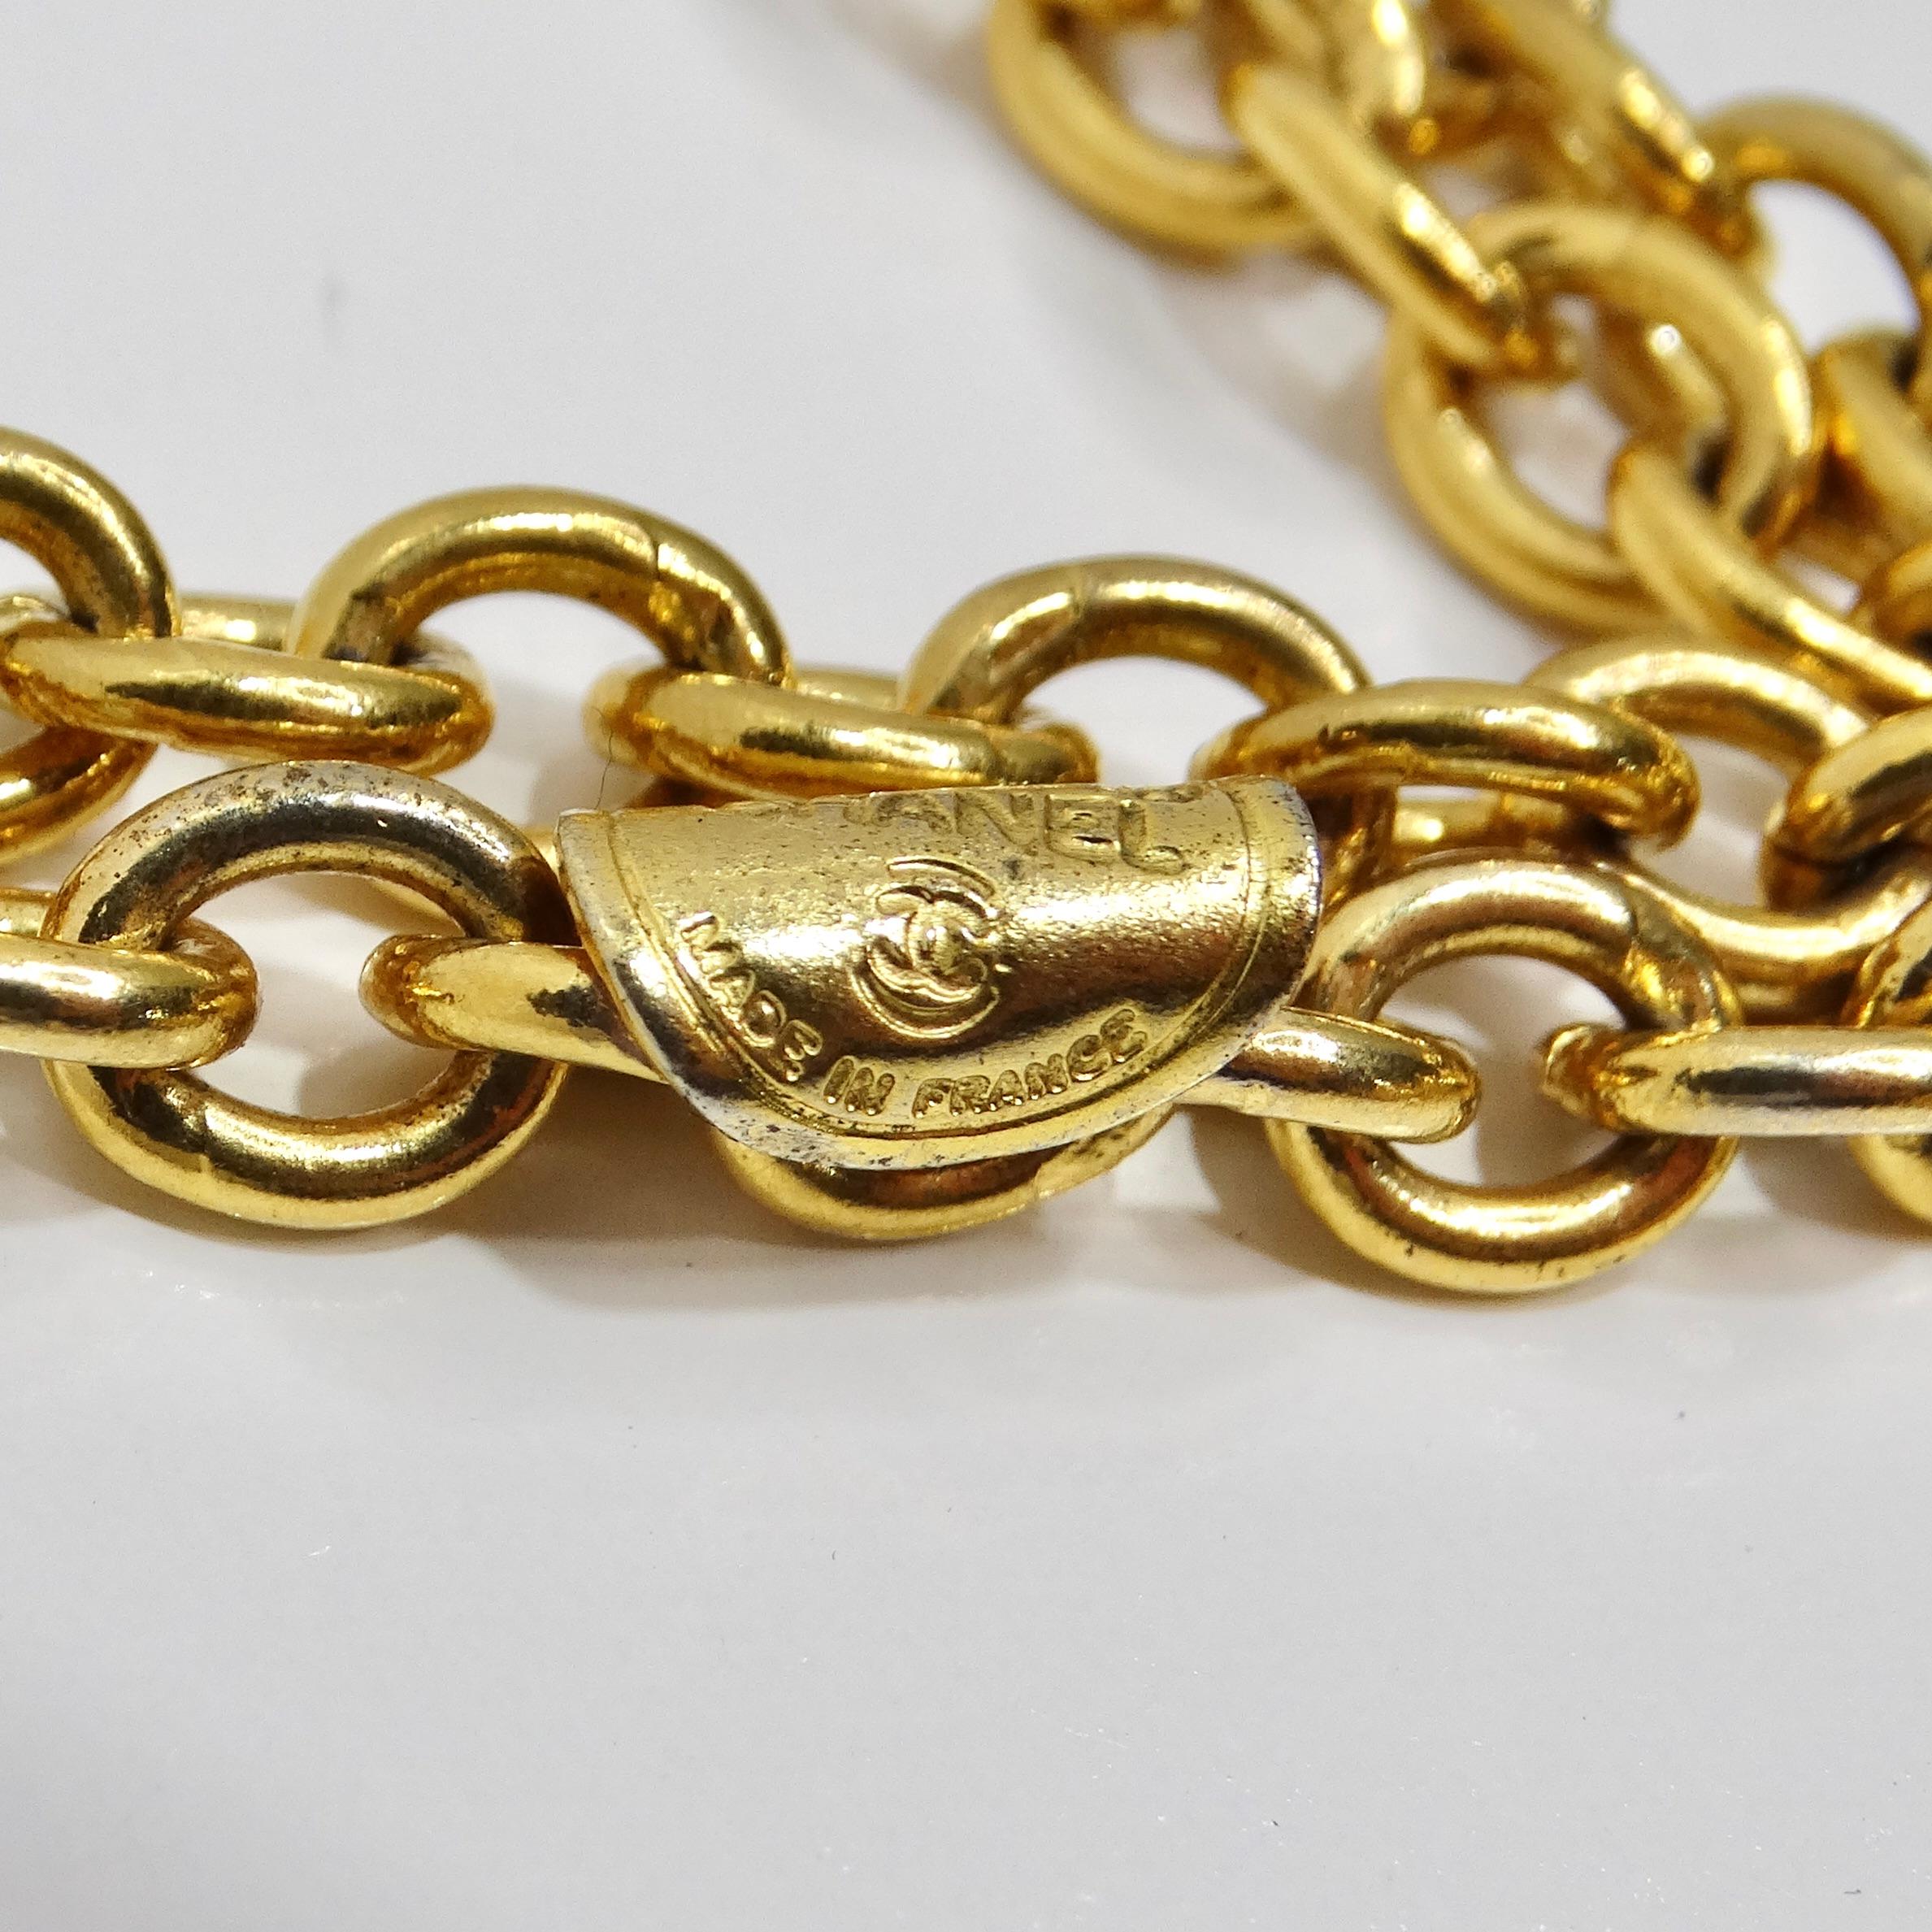 Chanel 1980s Gold Tone Flap Bag Necklace For Sale 7